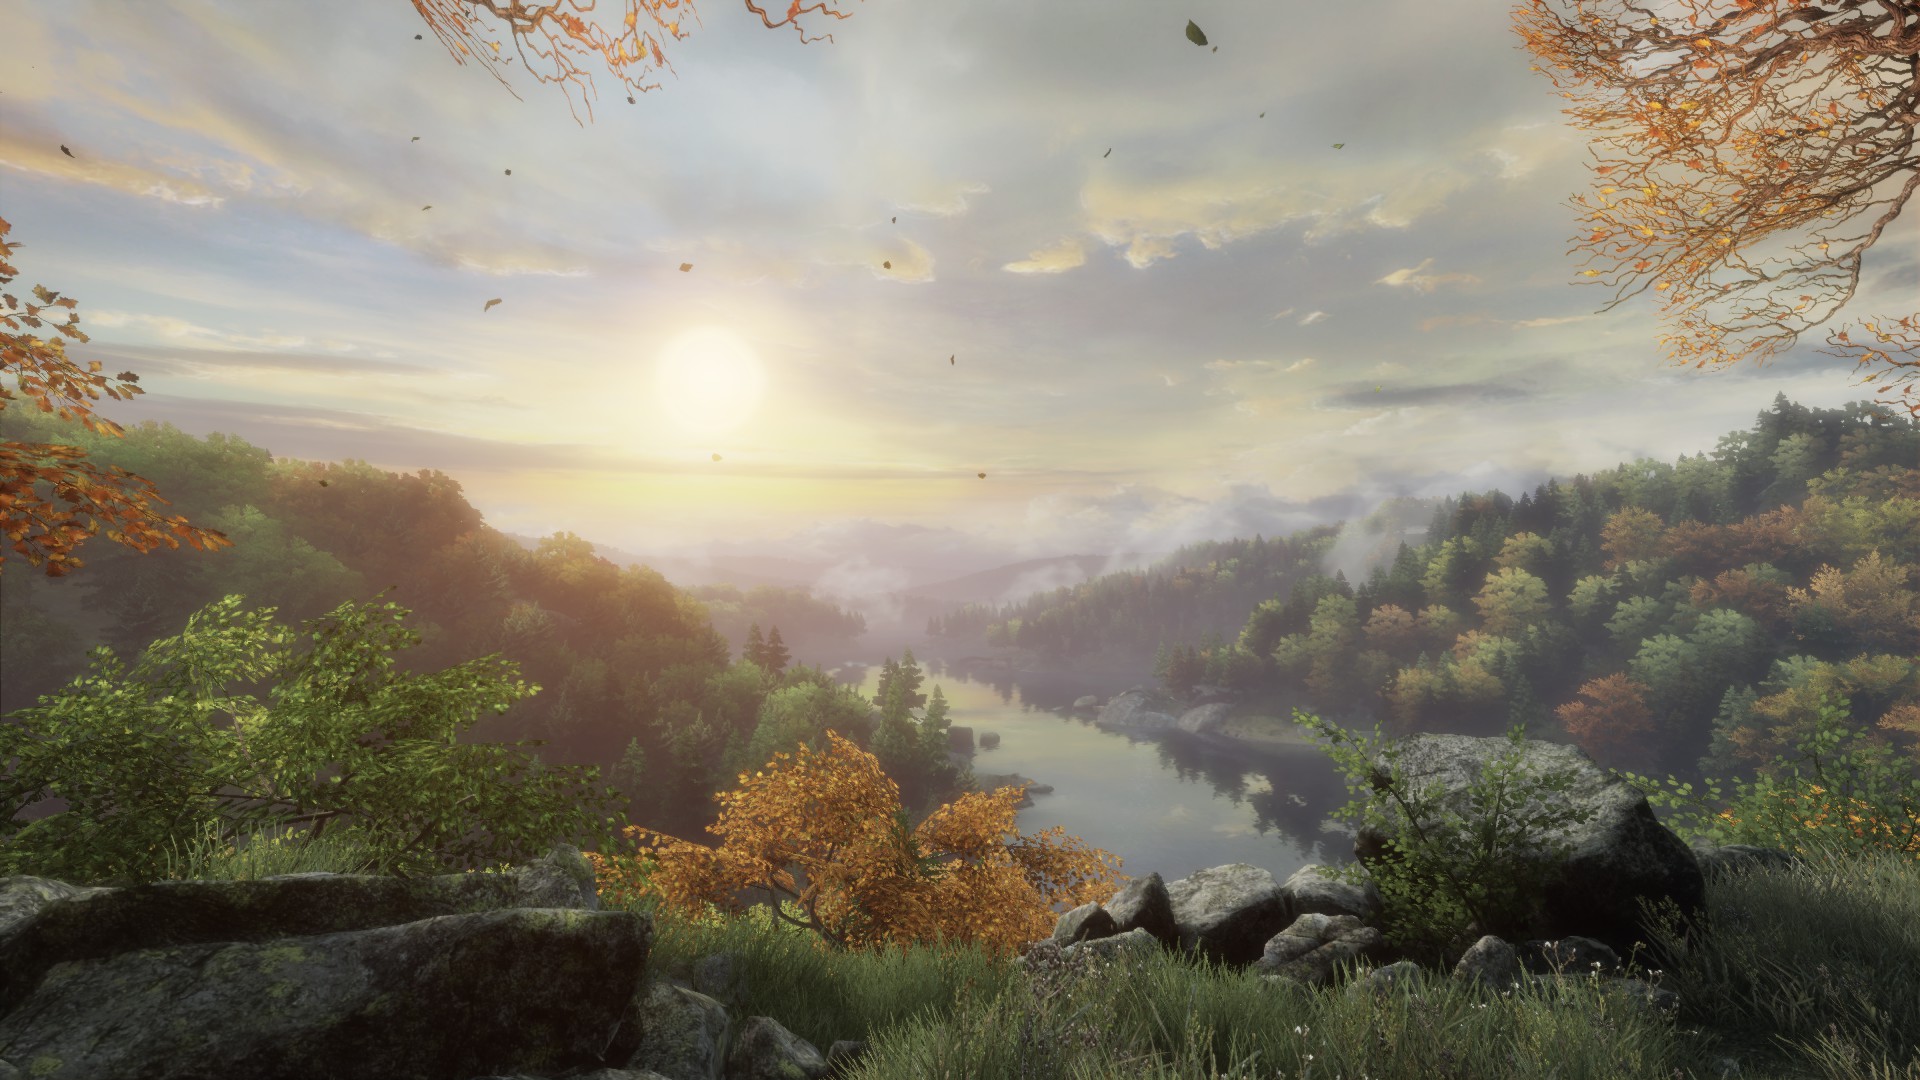 Artistry in Games 2014-09-25_00008 The Vanishing of Ethan Carter Review: Vanish Into This Tale Reviews  Wells verne the vanishing of ethan carter PS4 PC narrative lovecraft jules indie horror GOG.com GOG exploration ethan carter ethan cthulu carter astronauts astronaut  